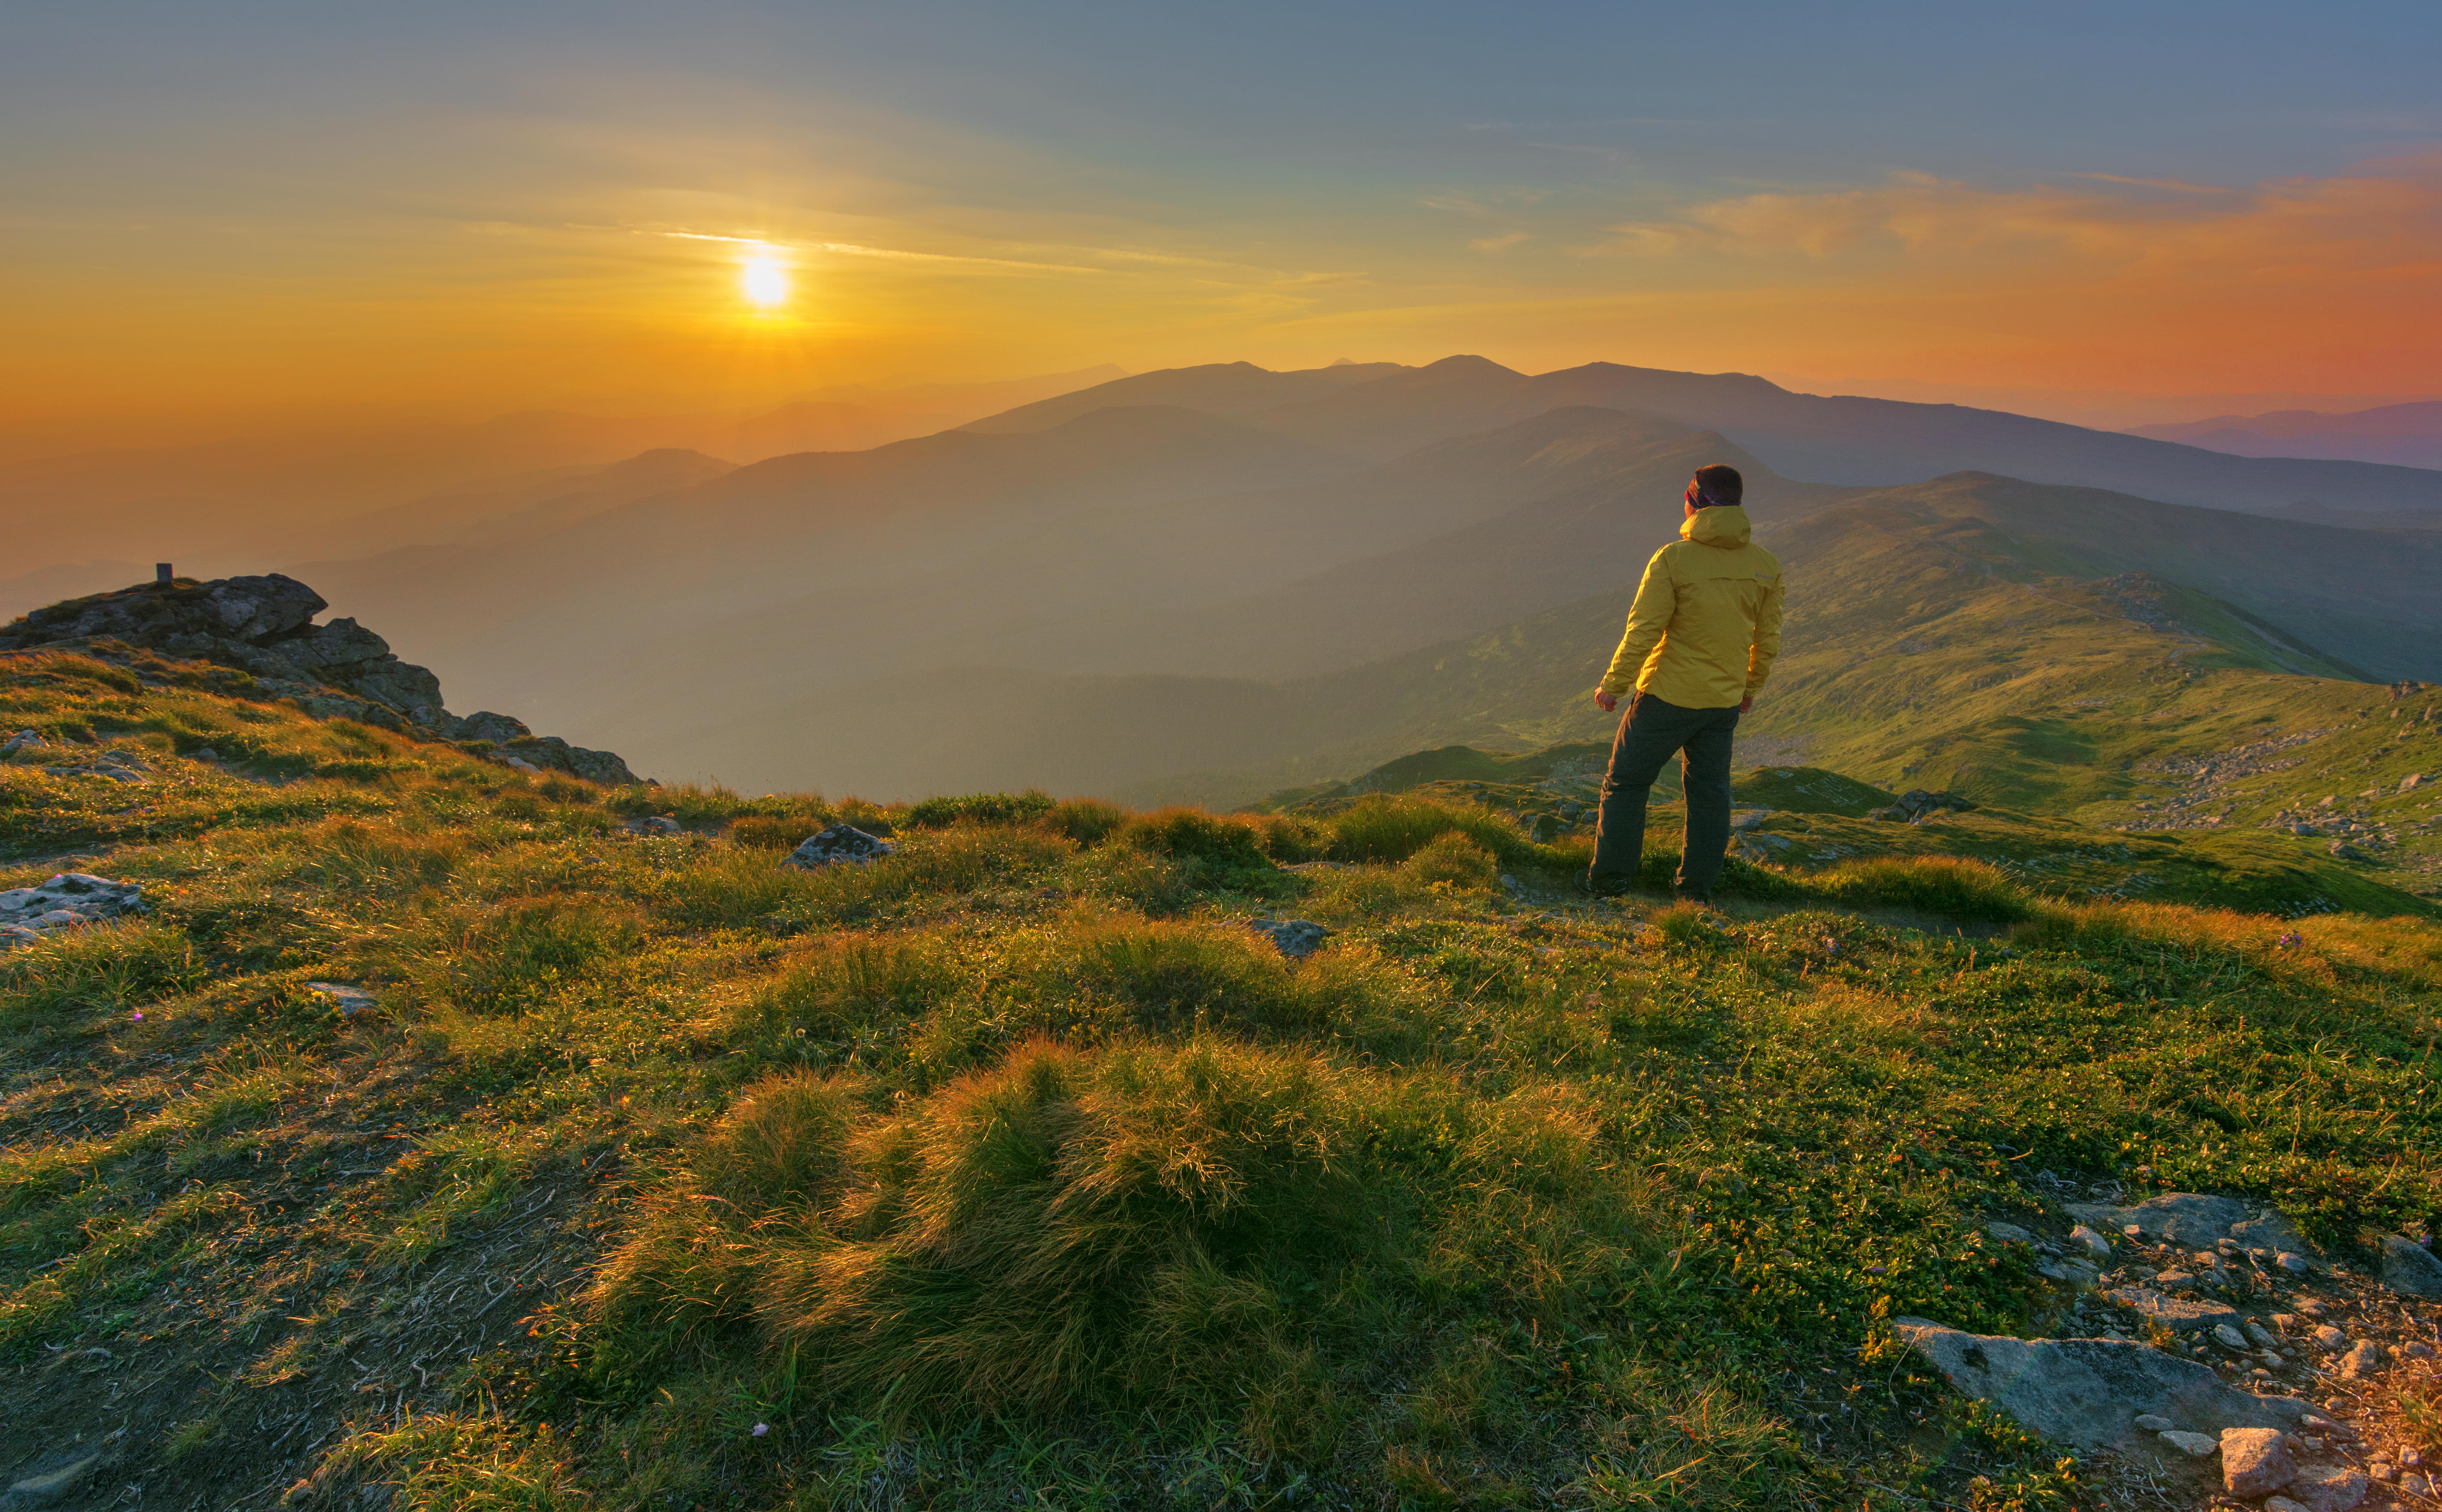 Witness the breathtaking sunrise and sunset view from the peak Mullayangri